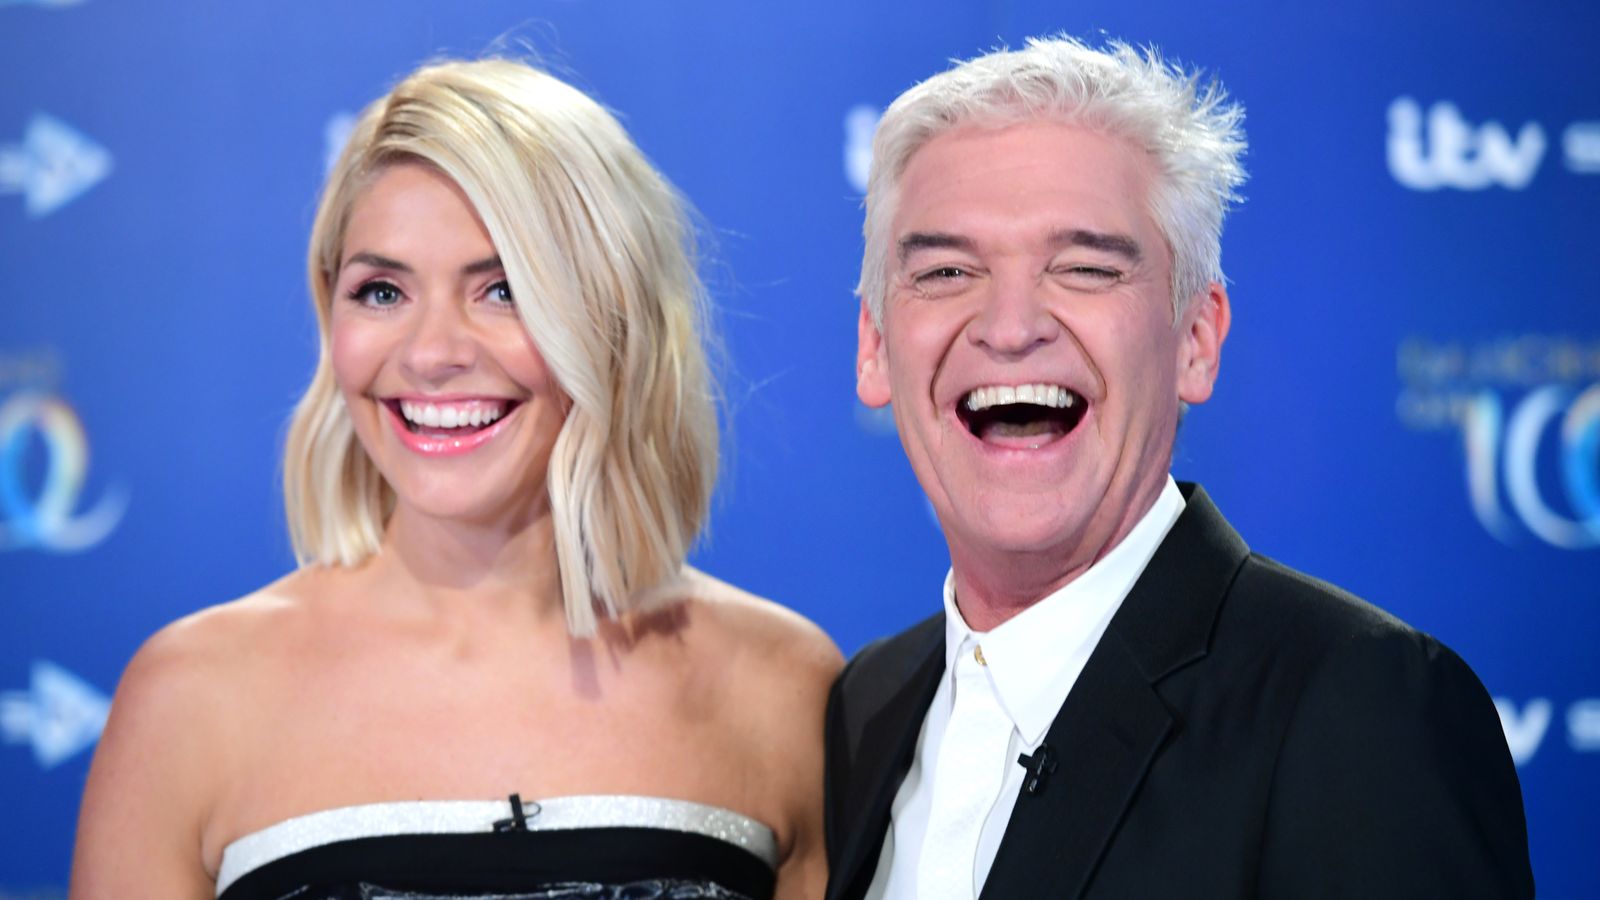 This Morning up for NTA despite Phillip Schofield scandal, but Holly Willoughby snubbed in best presenter category